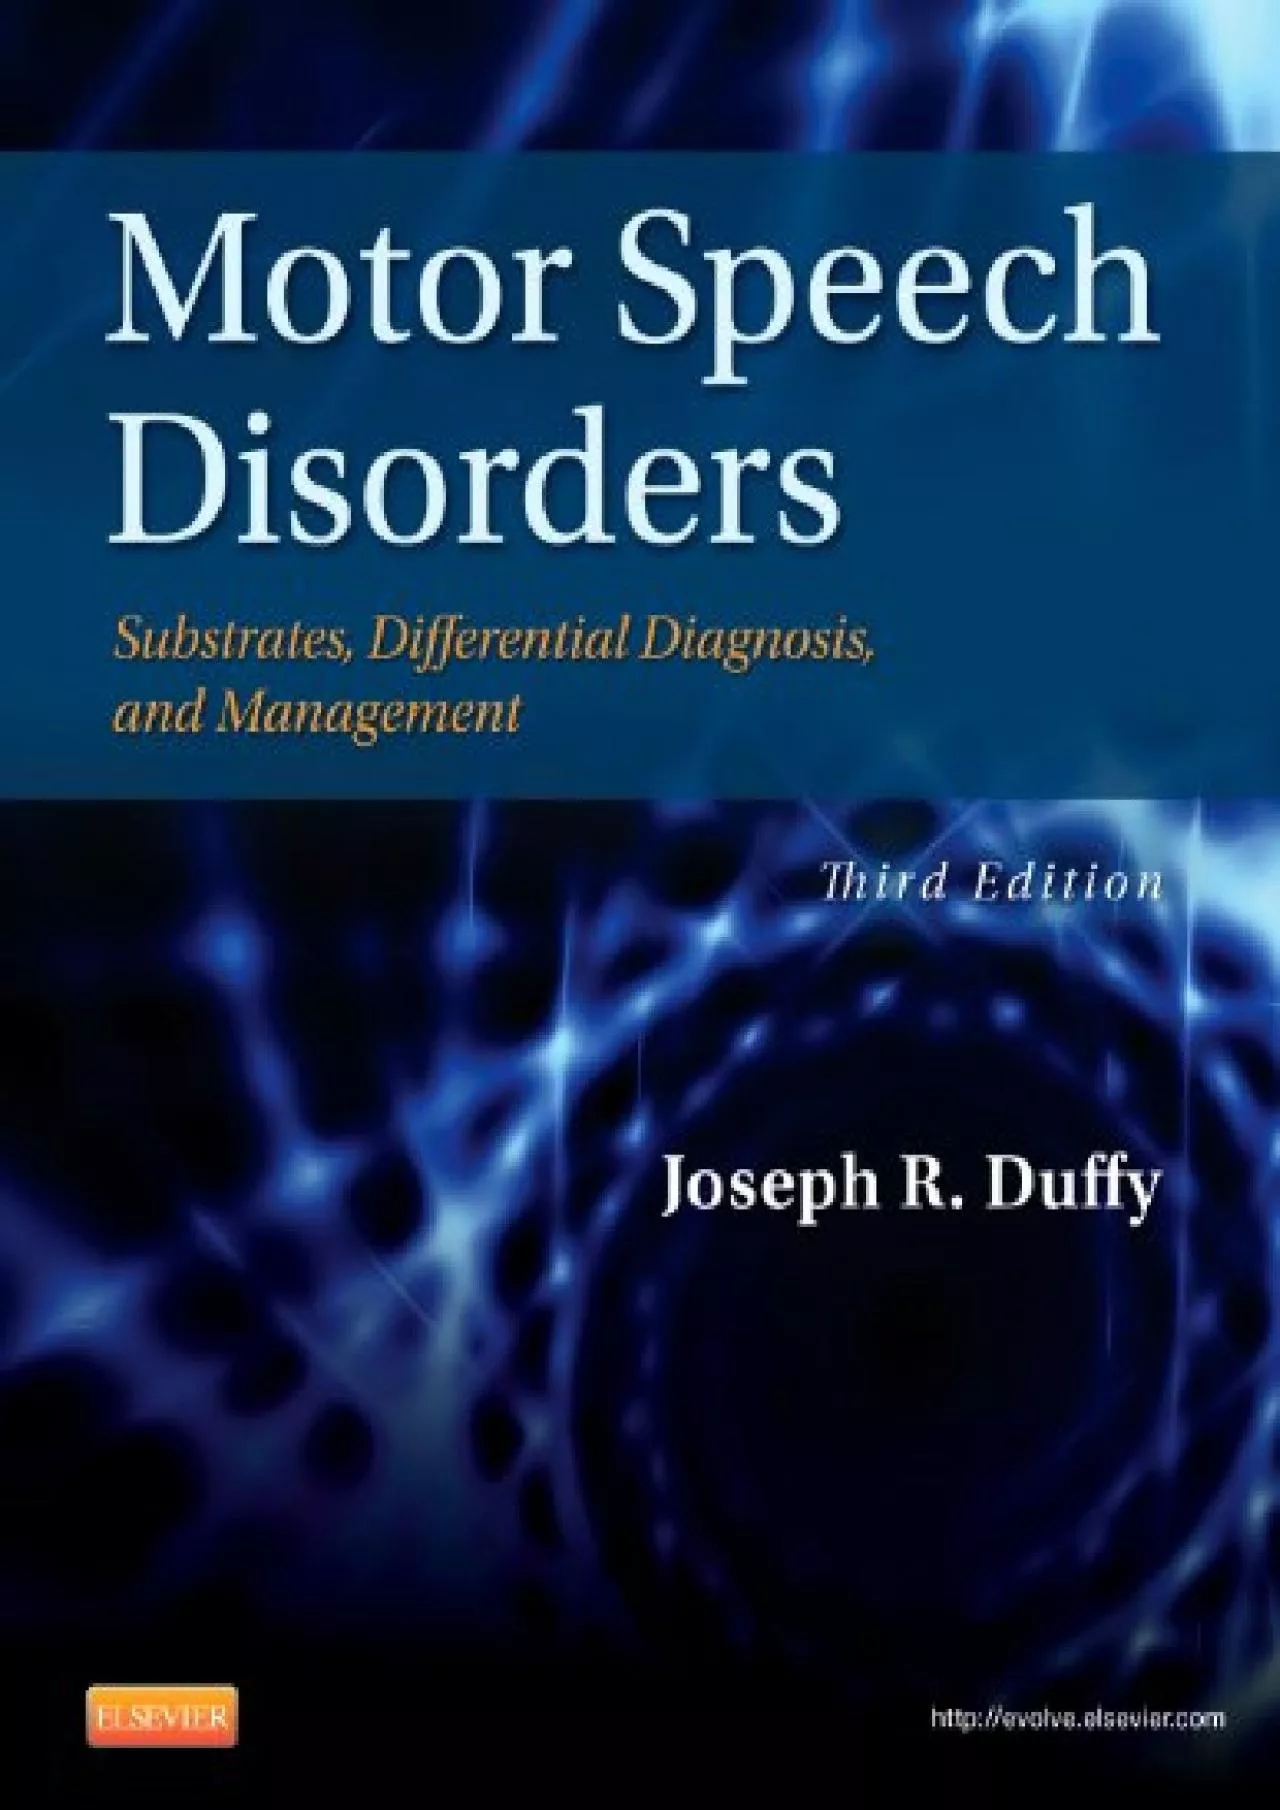 (DOWNLOAD)-Motor Speech Disorders: Substrates, Differential Diagnosis, and Management